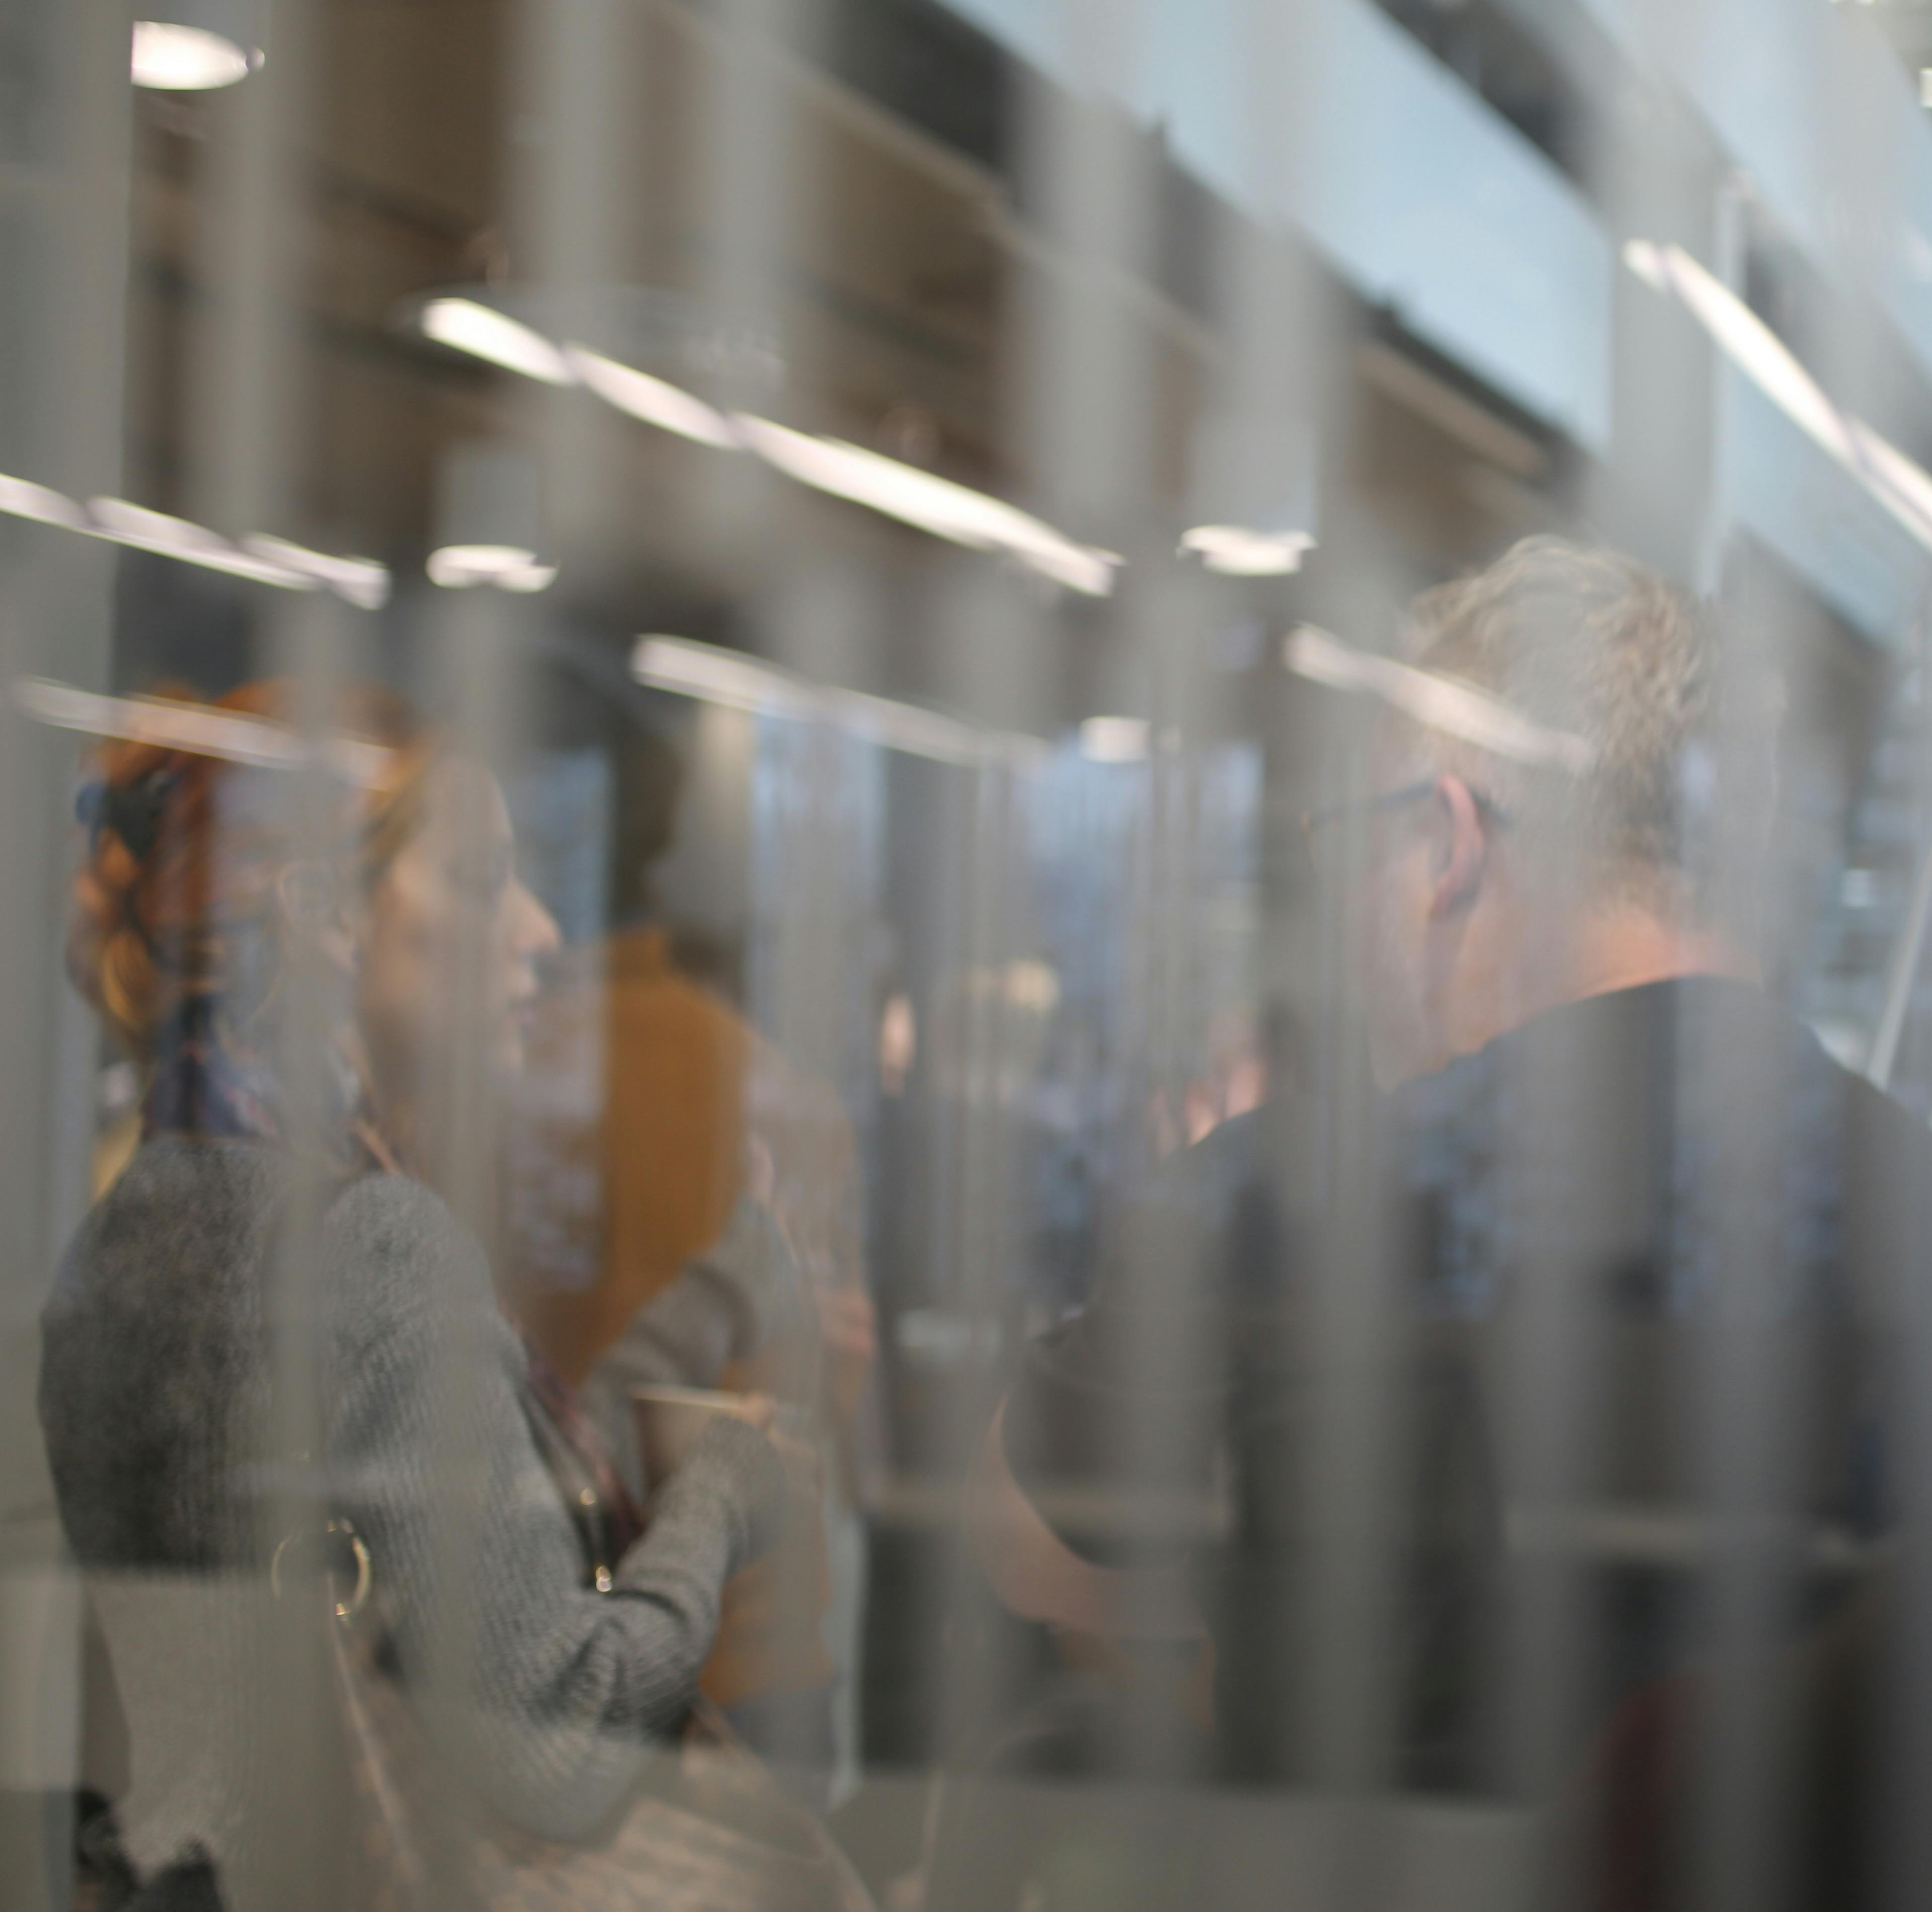 People speaking whilst behind a pane of glass